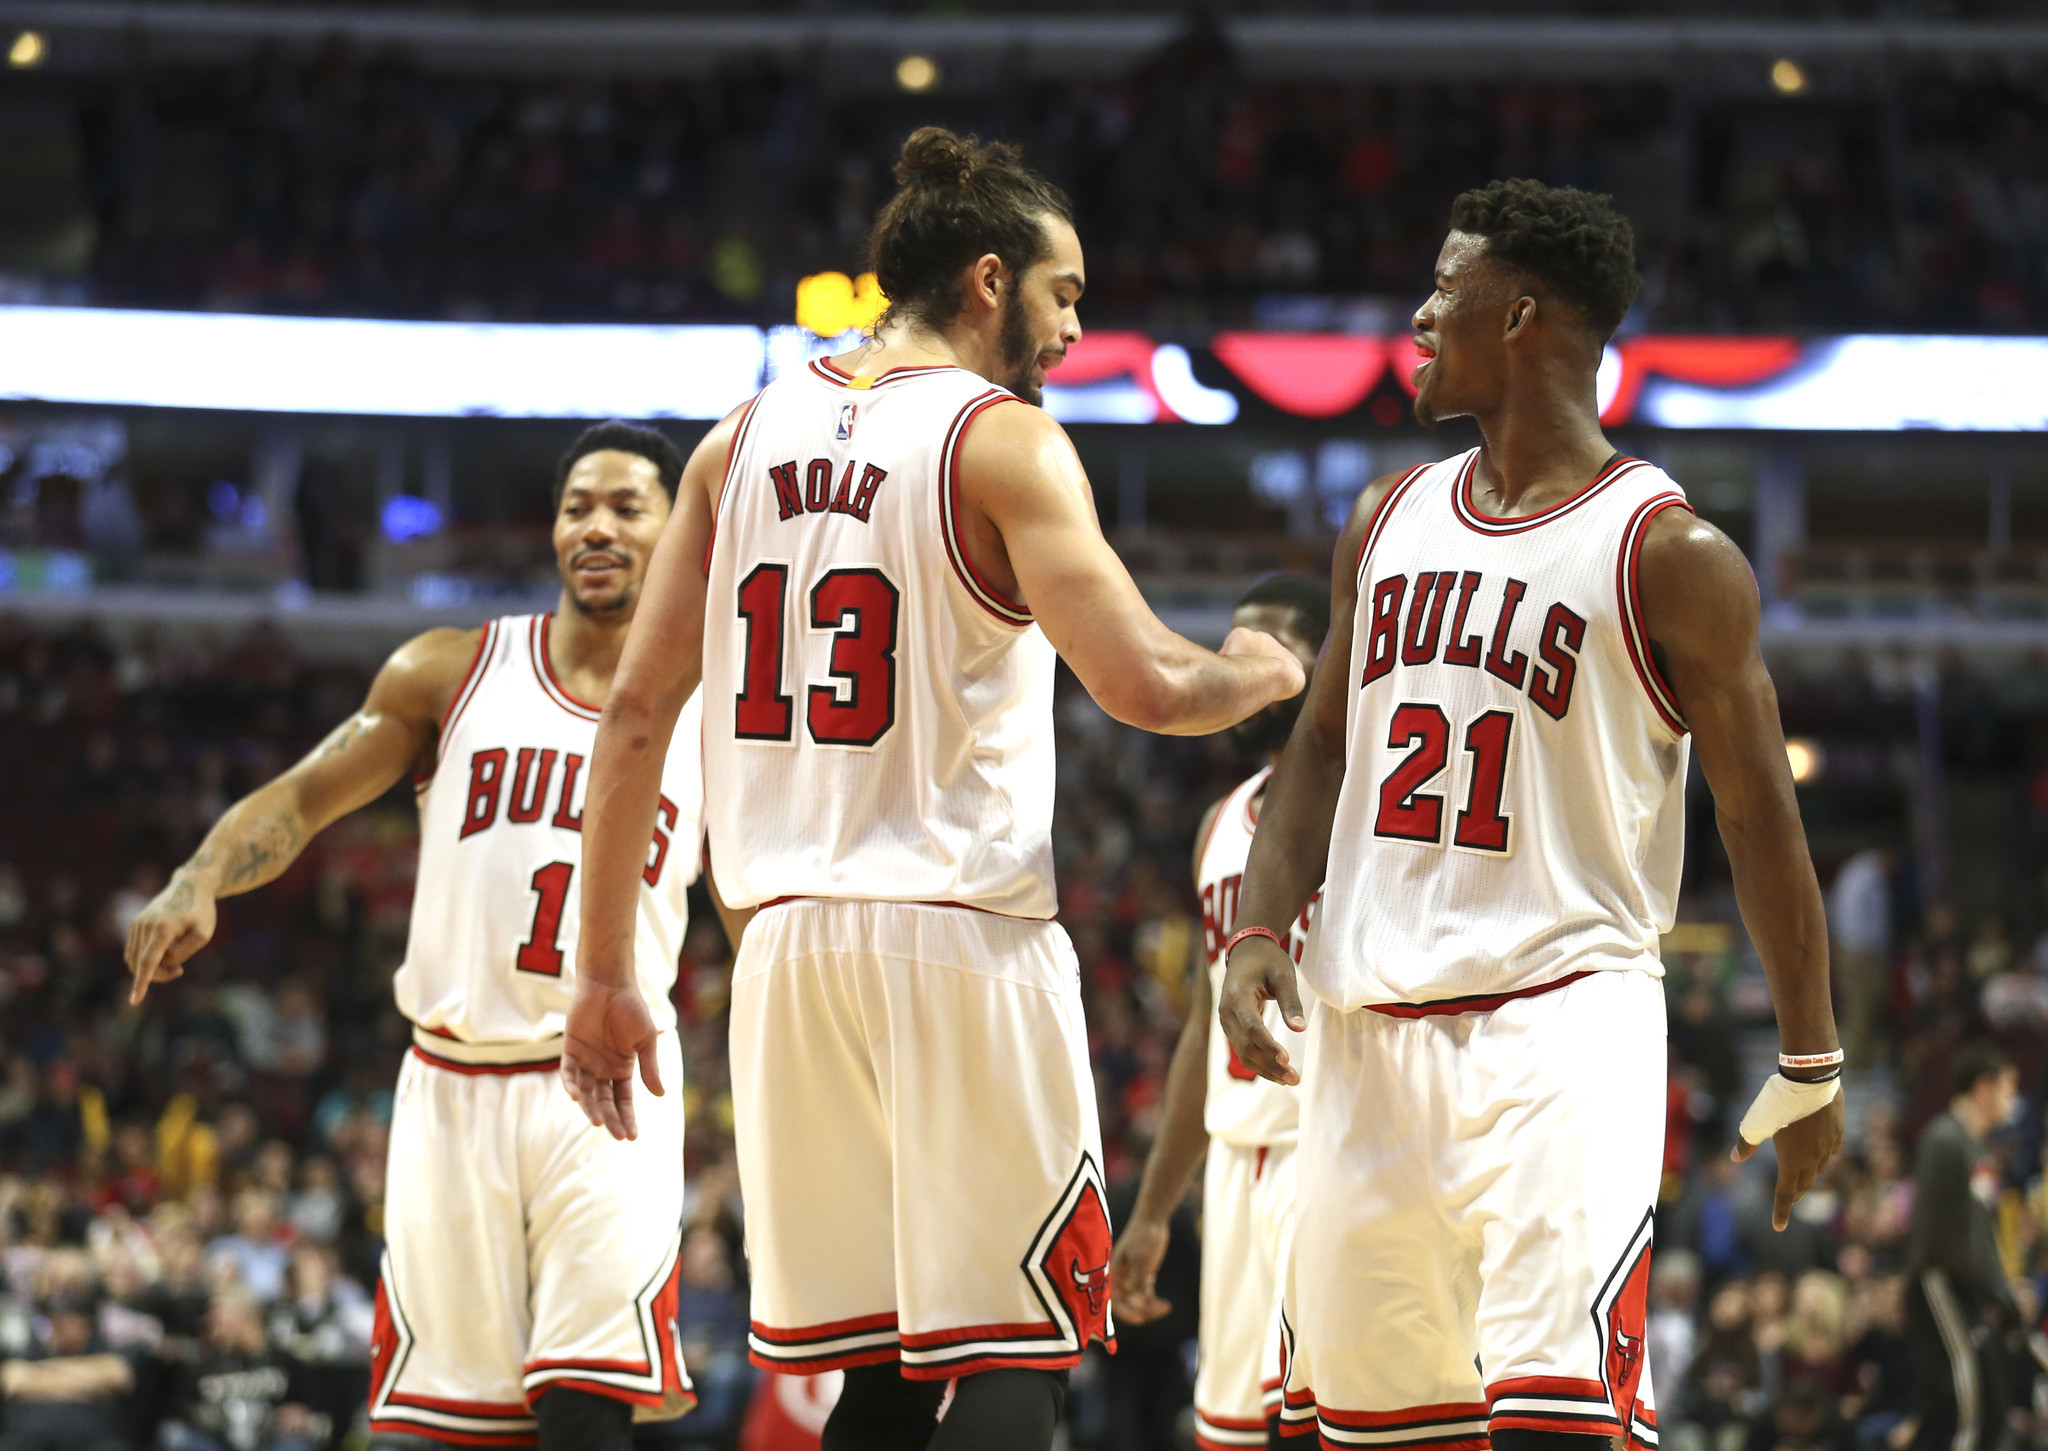 Derrick Rose Jimmy Butler could become an All Star pairing for Bulls – Chicago Tribune